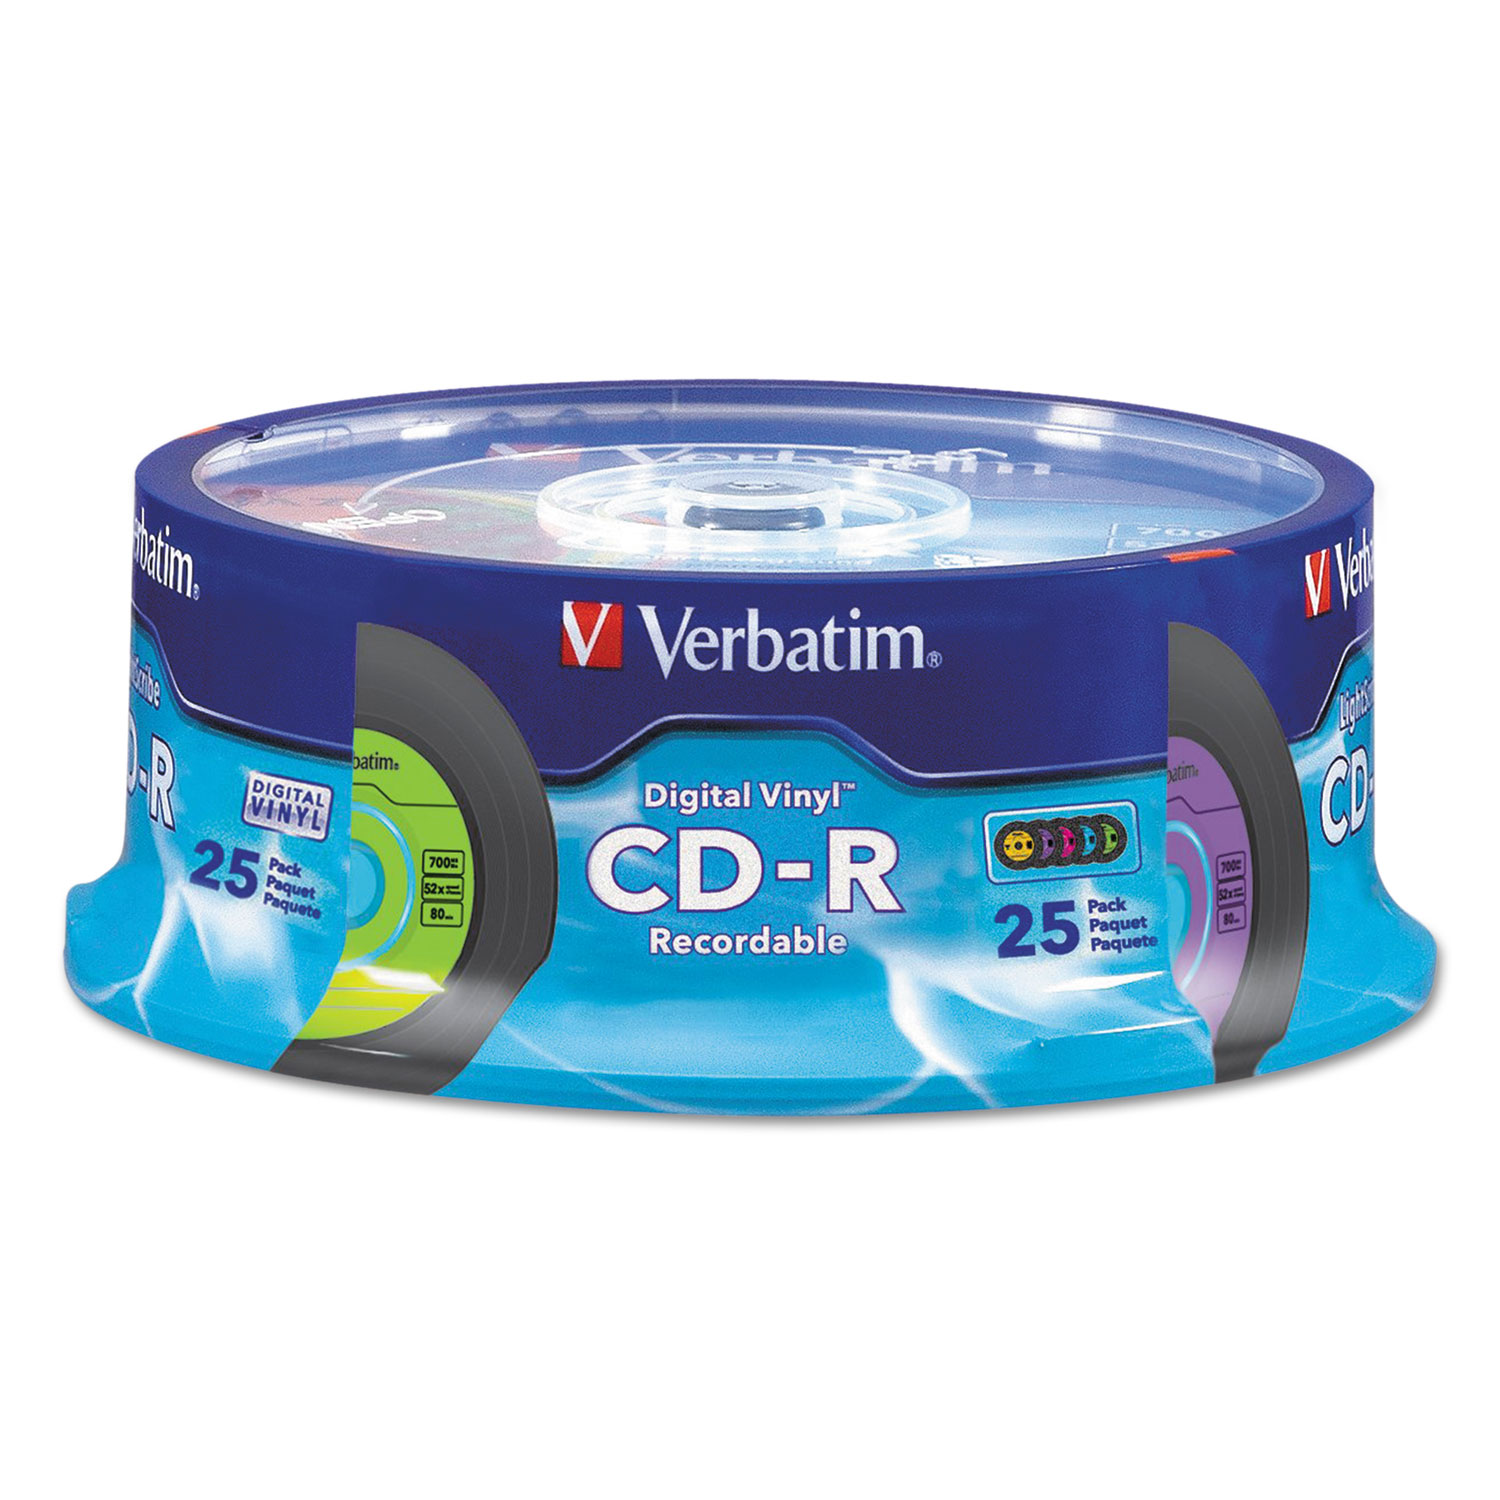 CD-R with Digital Vinyl Surface, 80min, 52X, 25/PK Spindle